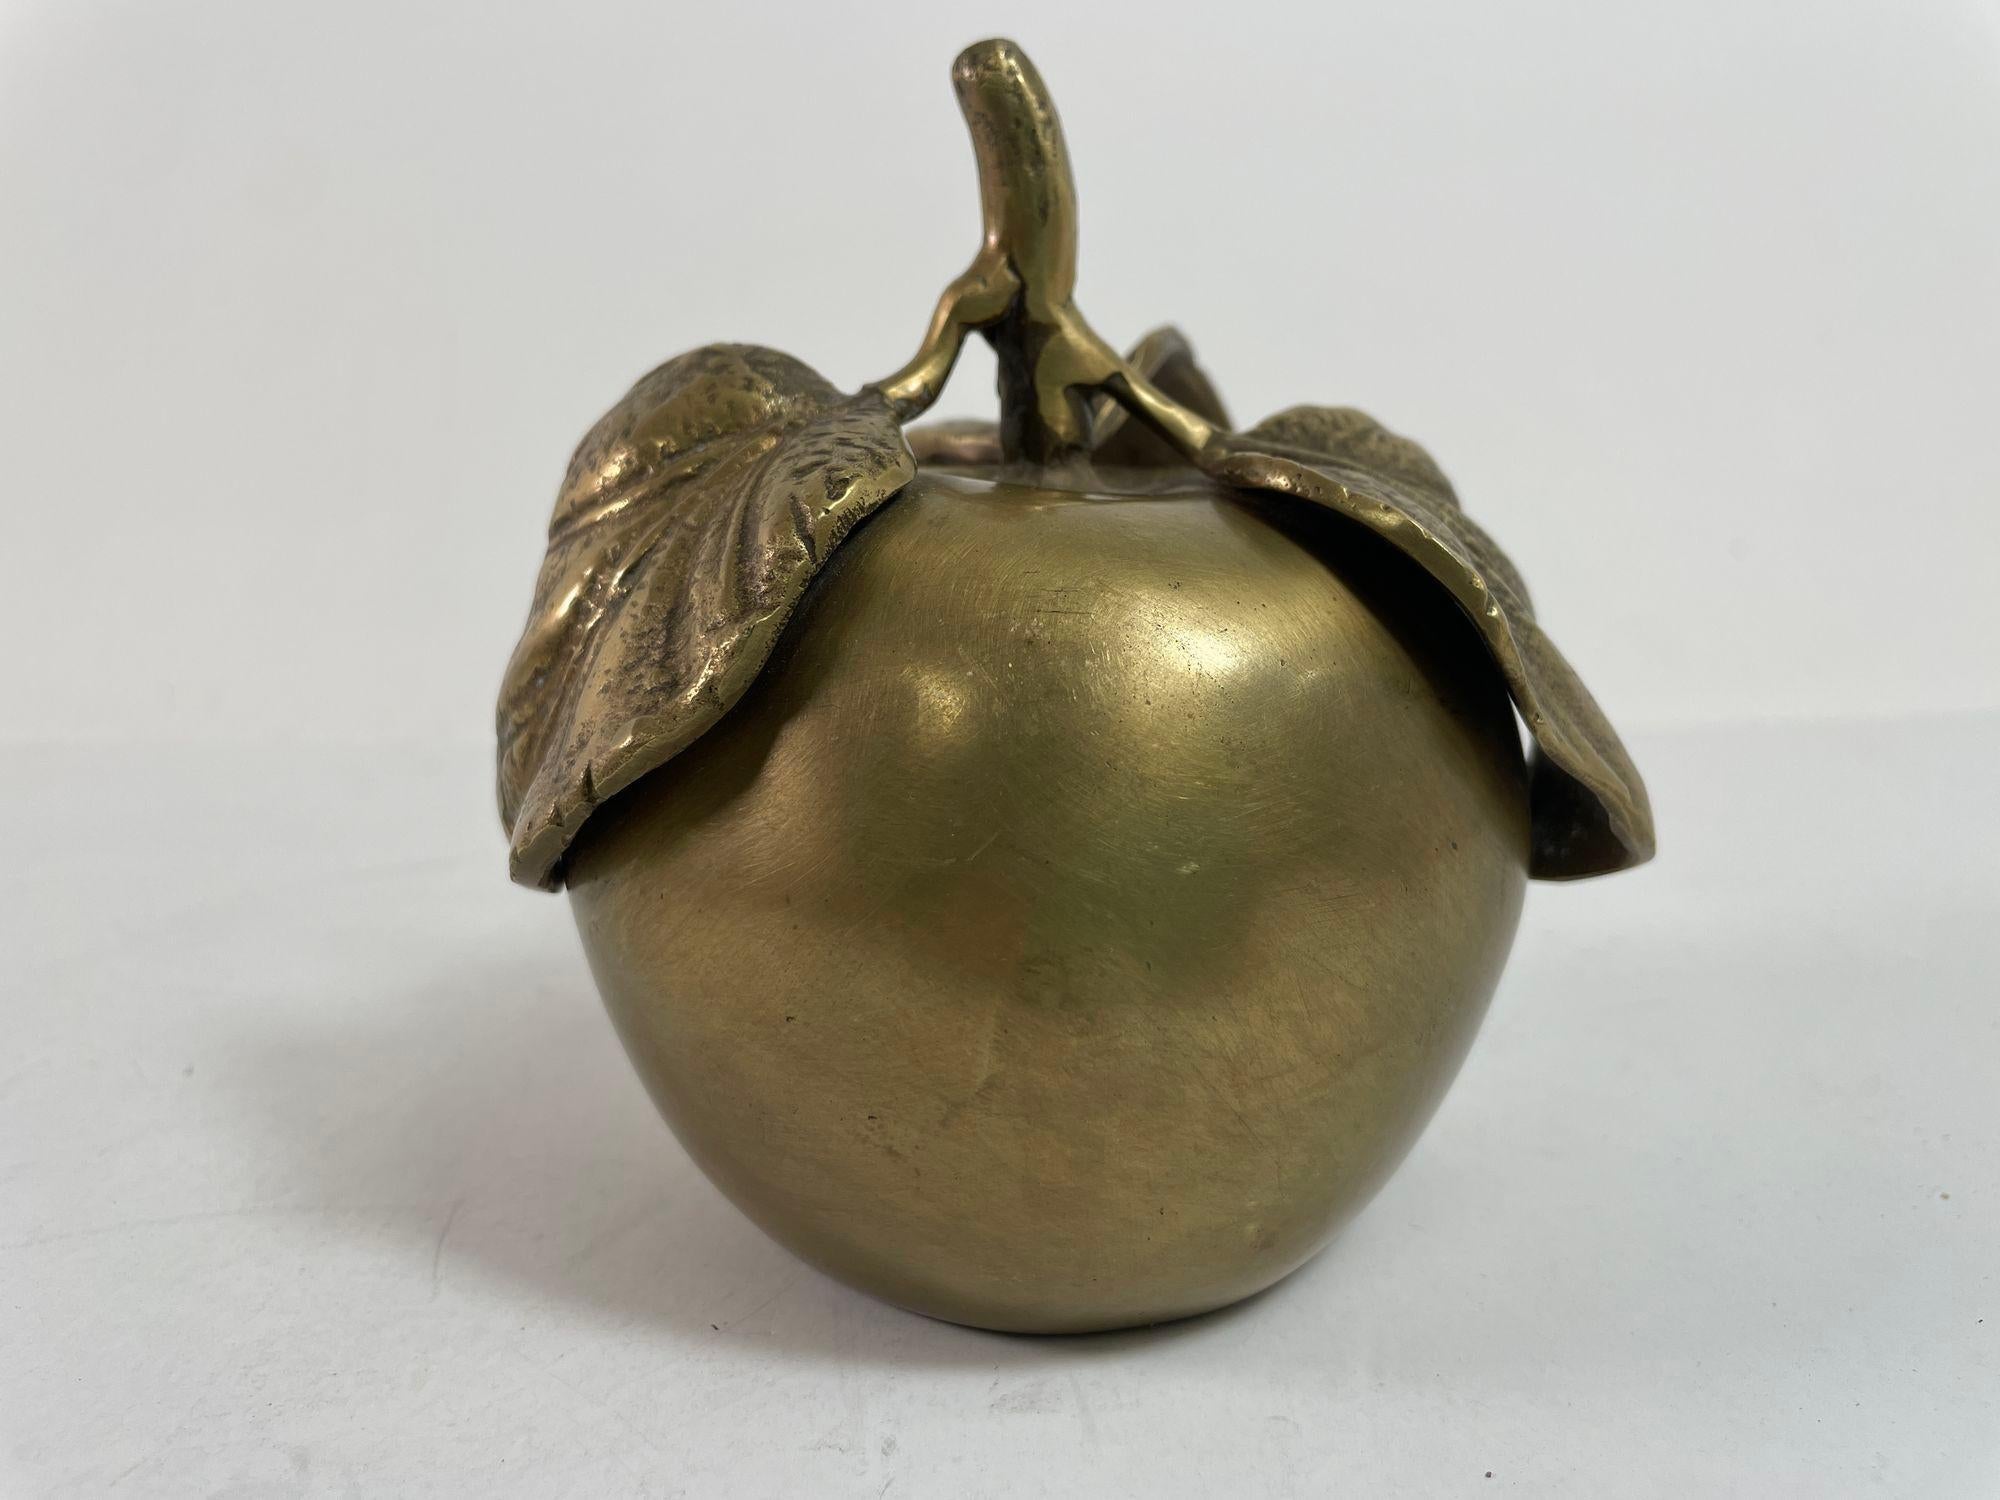 Vintage Brass Apple Sculpture Paperweight In Good Condition For Sale In North Hollywood, CA